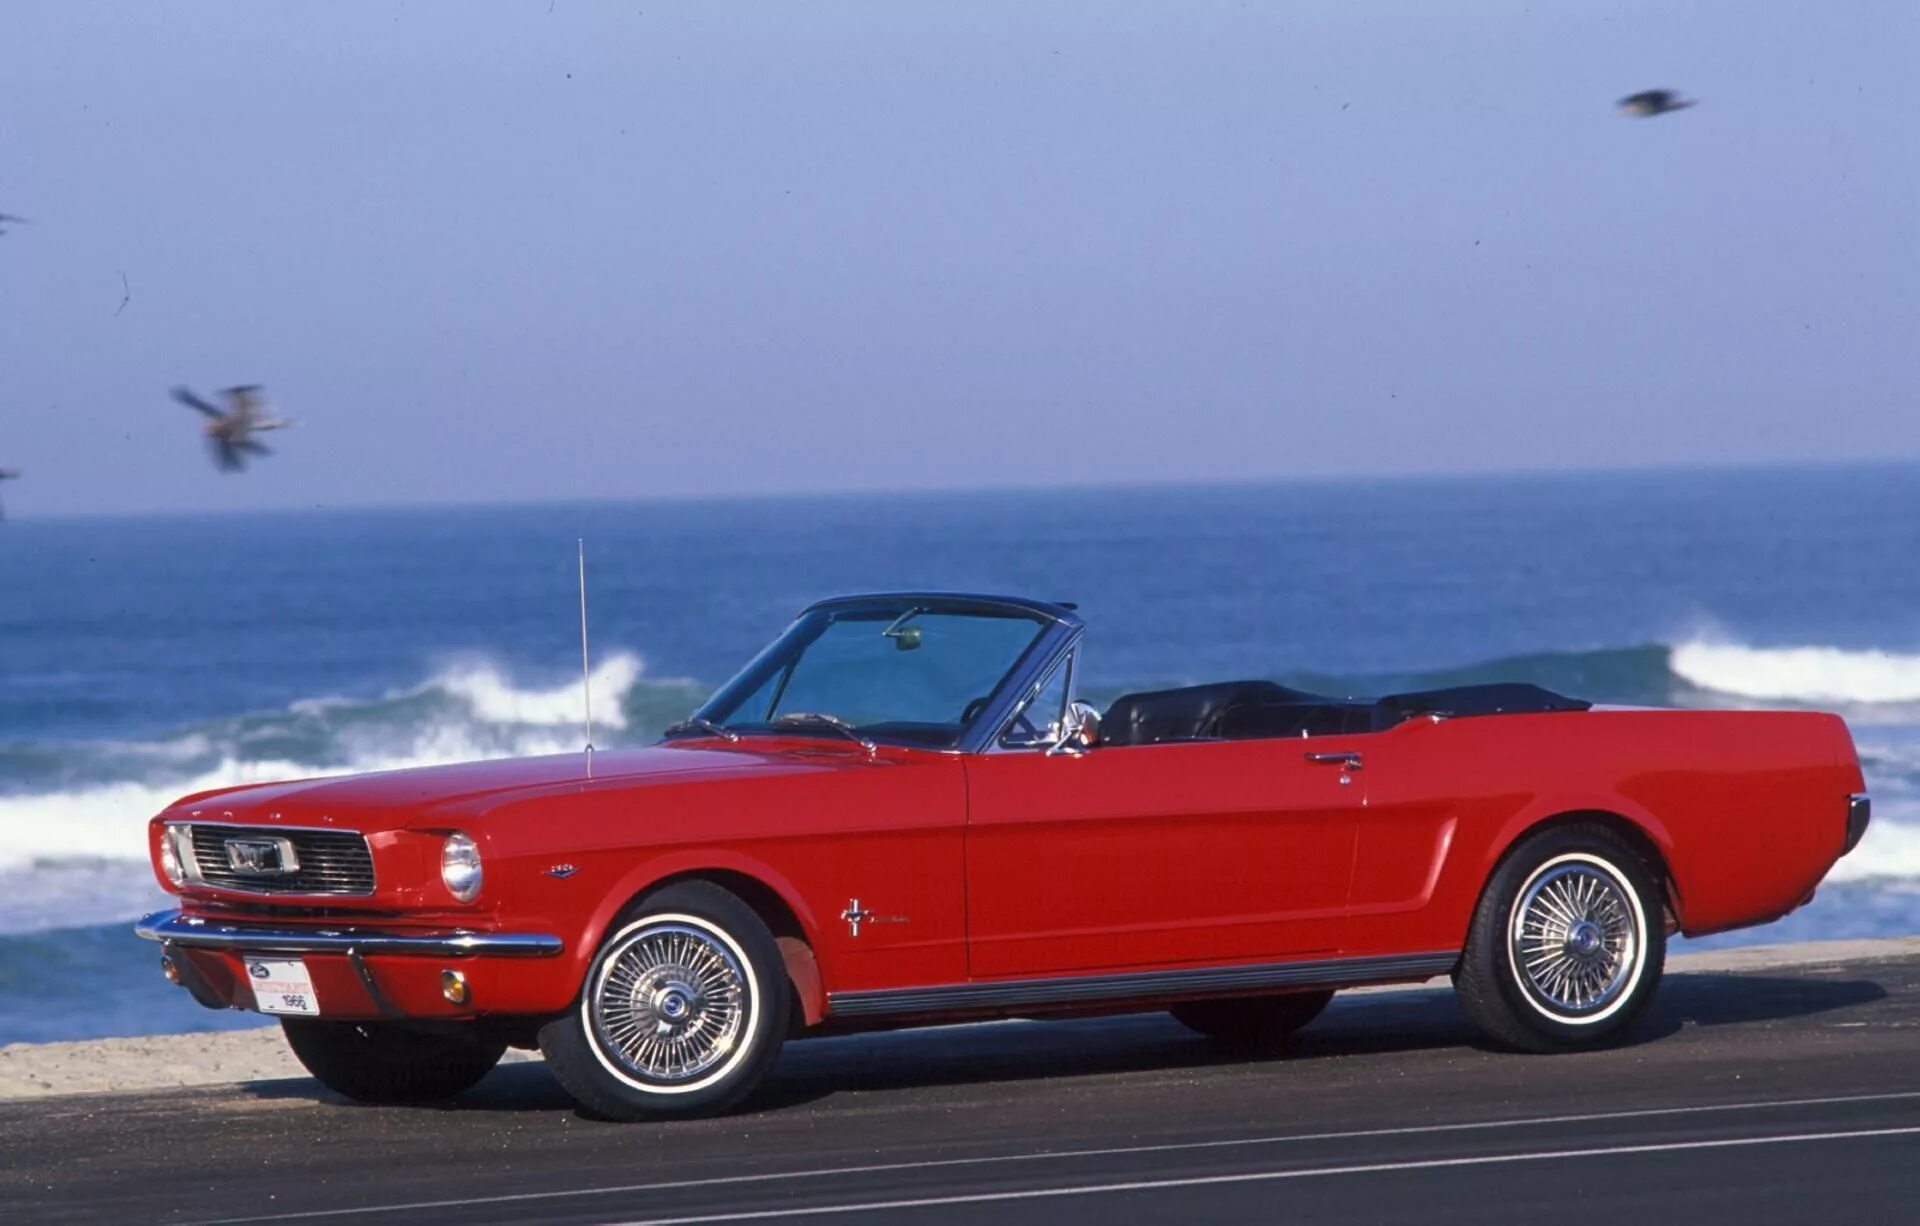 Мустанг 60. Форд Мустанг 1966. Ford Mustang Convertible 1966. Ford Mustang Cabriolet 1966. Красный Ford Mustang 1966.